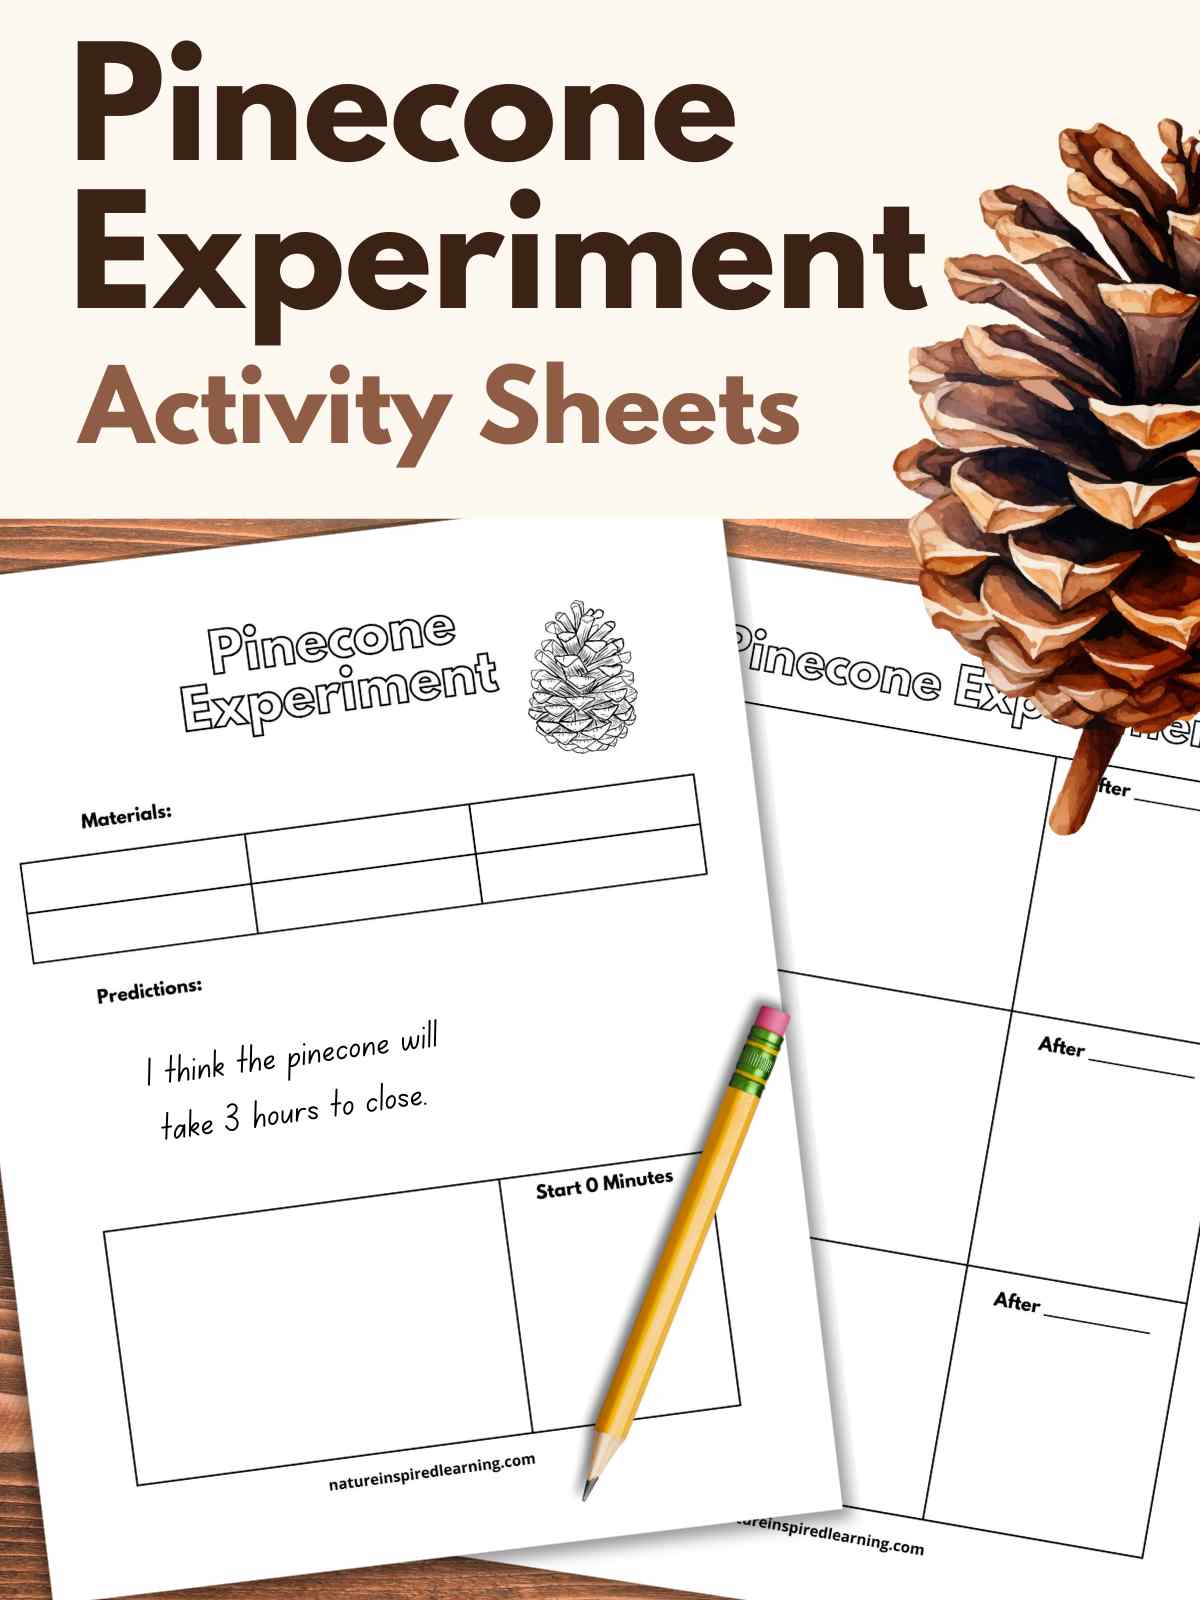 Two overlapping worksheets with a pencil slanted on the top sheet. Large pinecone upper right next to brown text overlay over a light tan background.